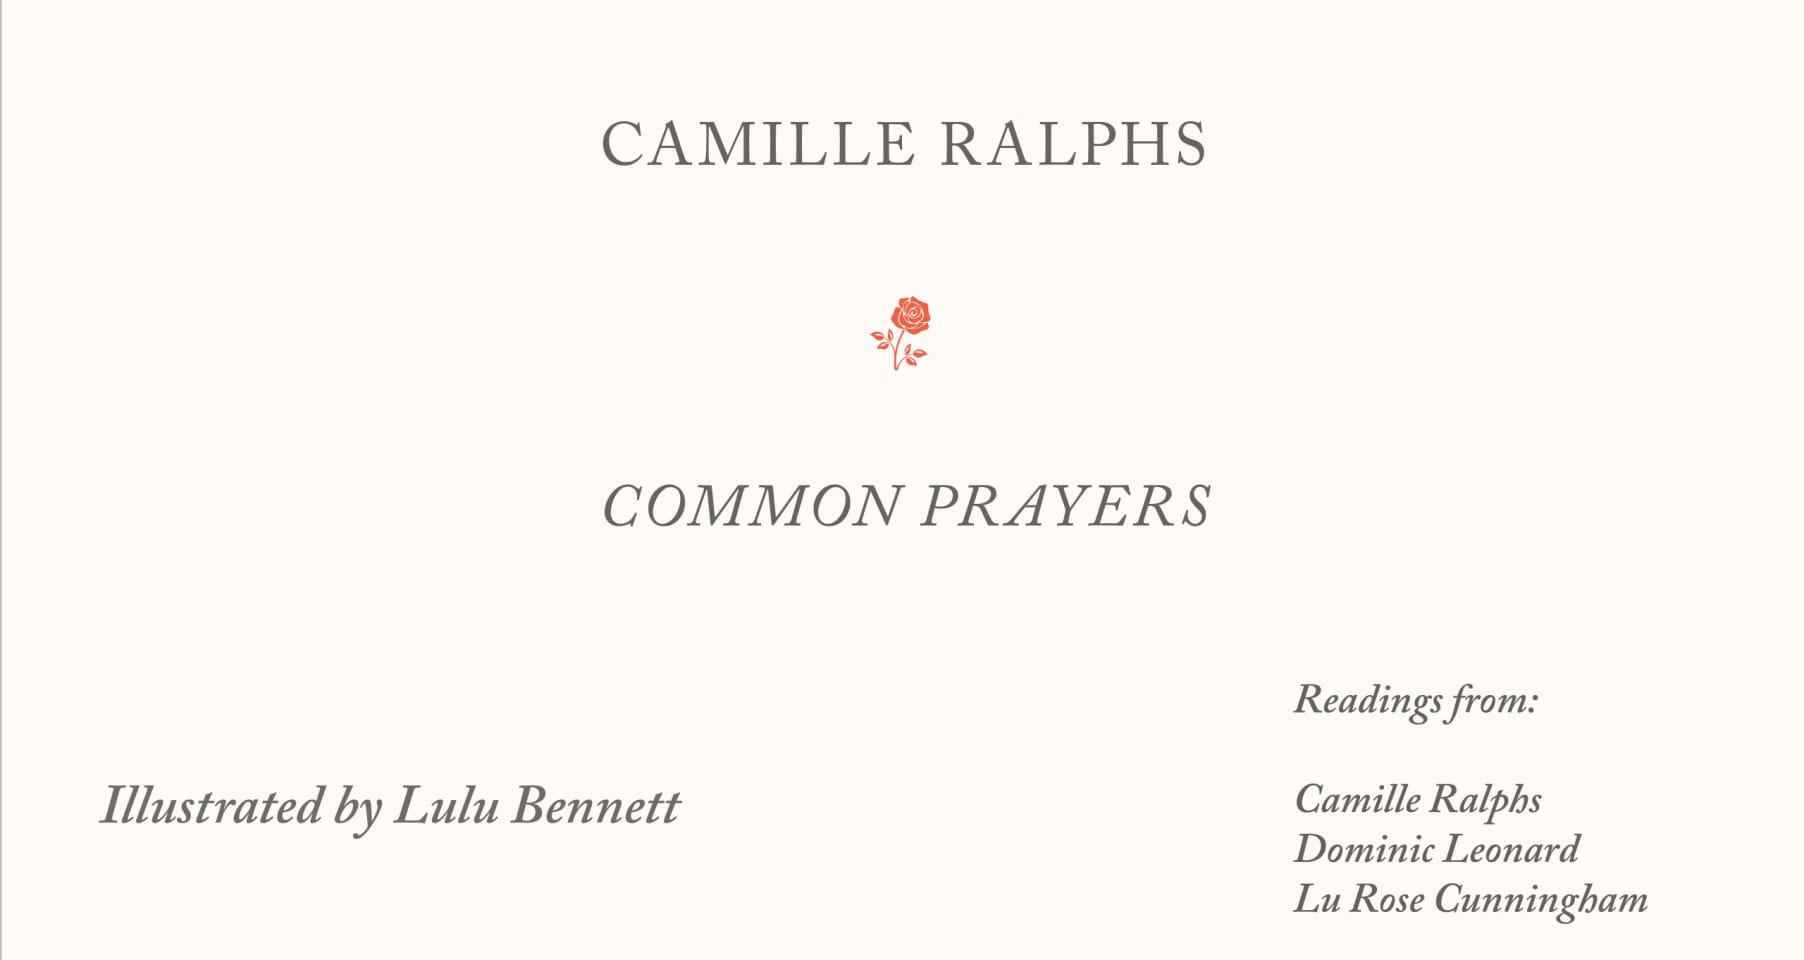 A flyer for the launch of Common Prayers by Camille Ralphs.